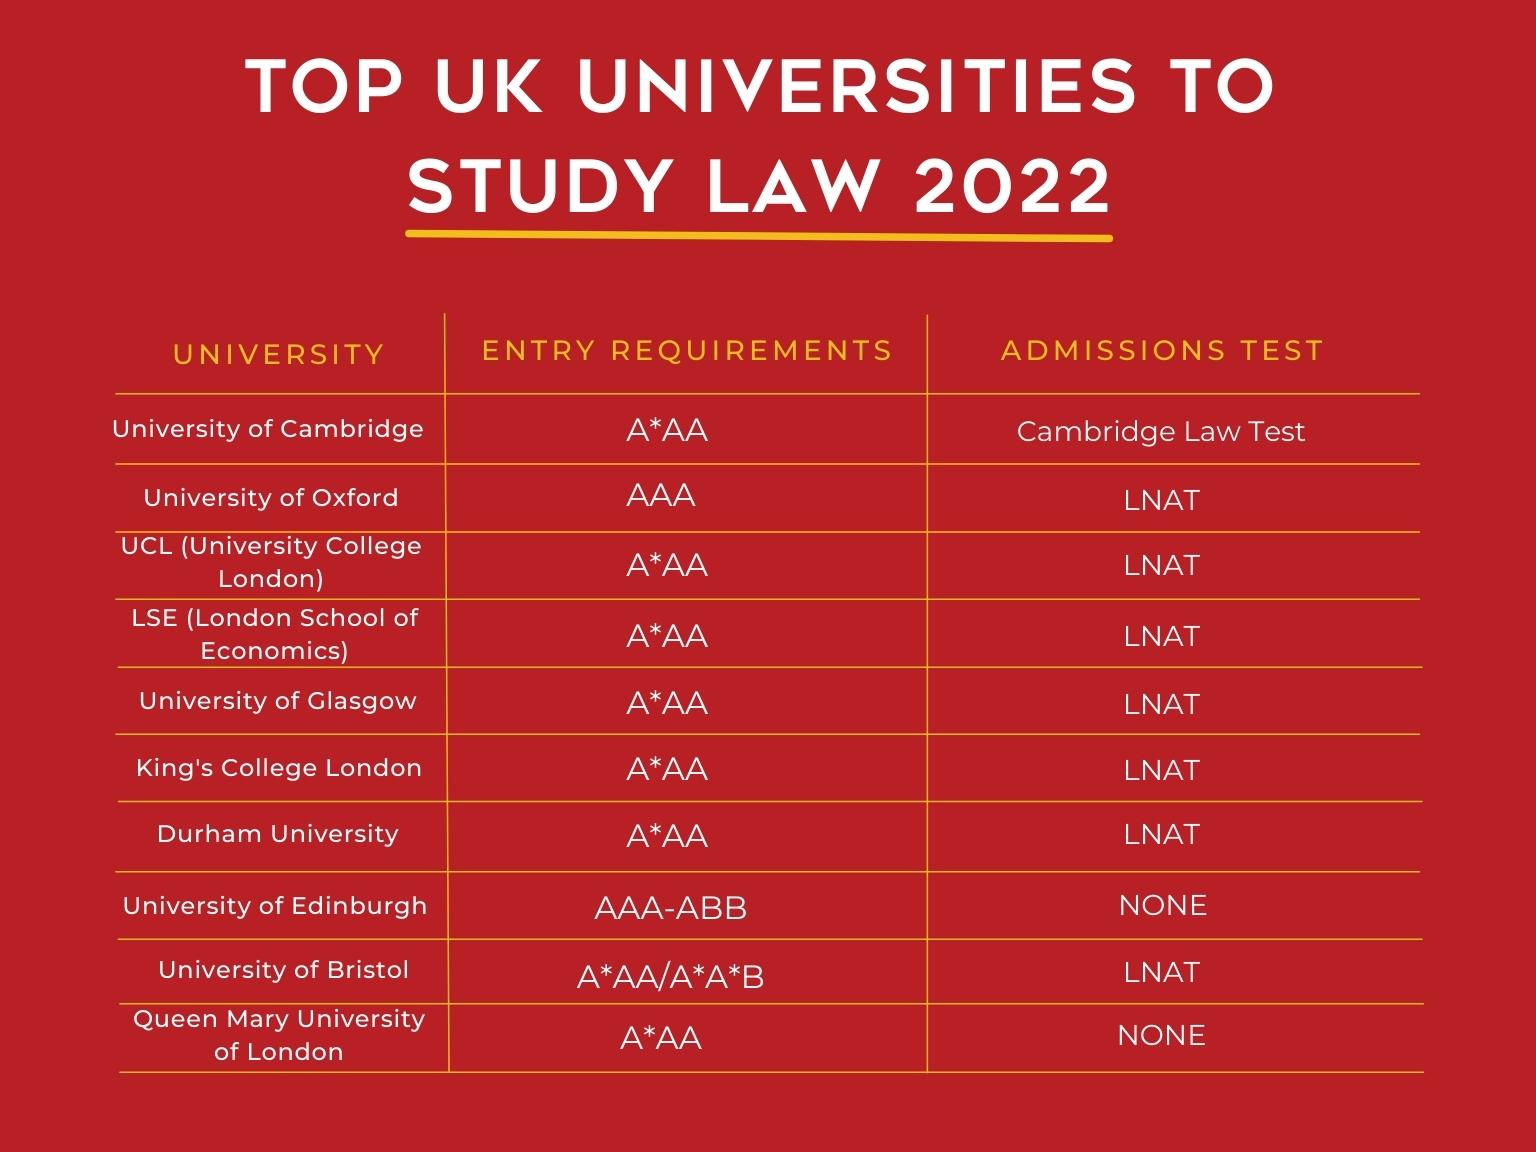 "Table depicting the top UK universities to study law alongside A-level requirements and entrance test needed"